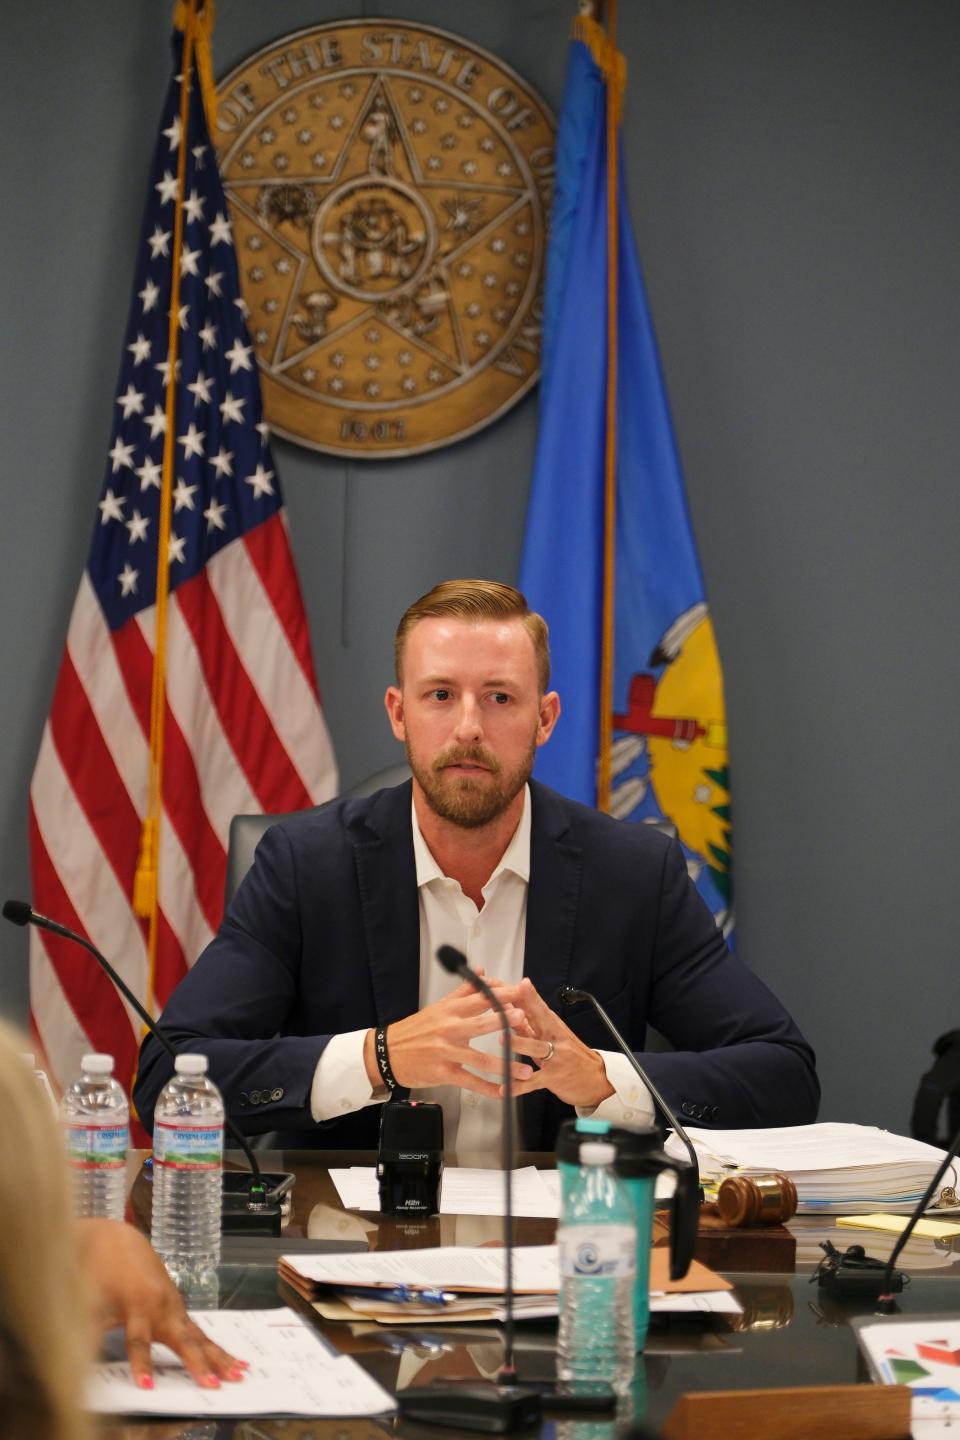 State schools Superintendent Ryan Walters proposed two new sets of rules impacting school libraries and transgender students.